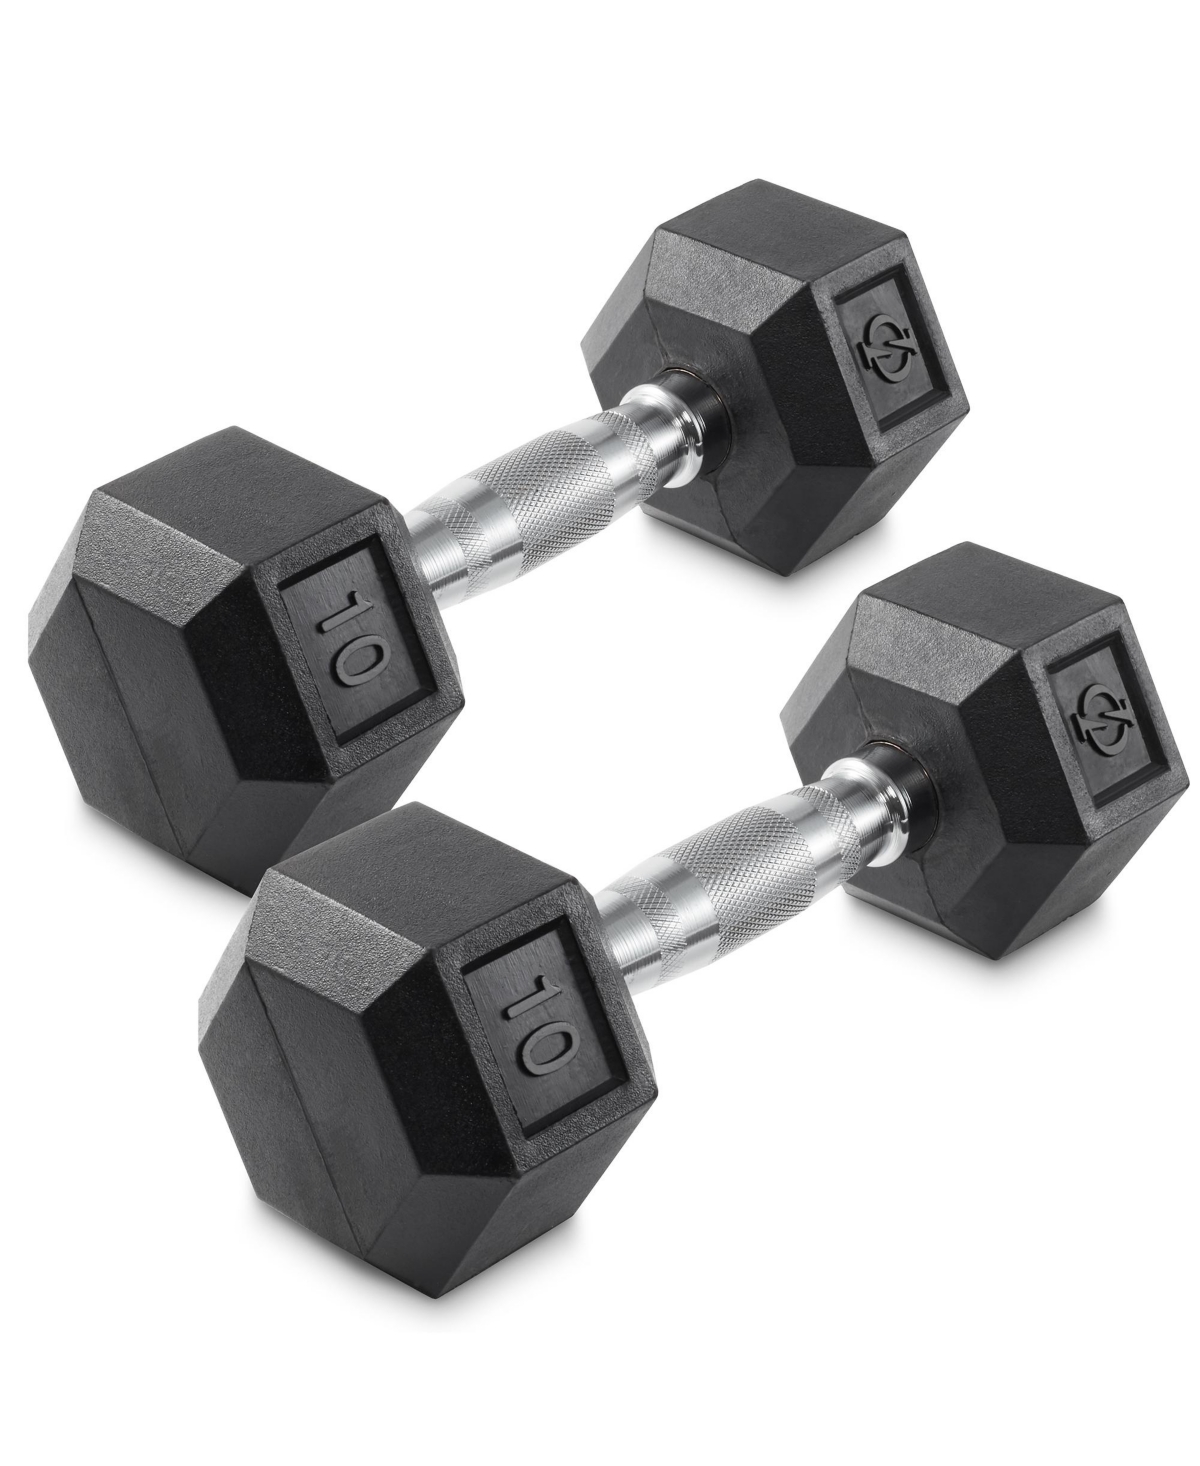 Rubber Coated Hex Dumbbell Hand Weights, 10 lb Pair - Black